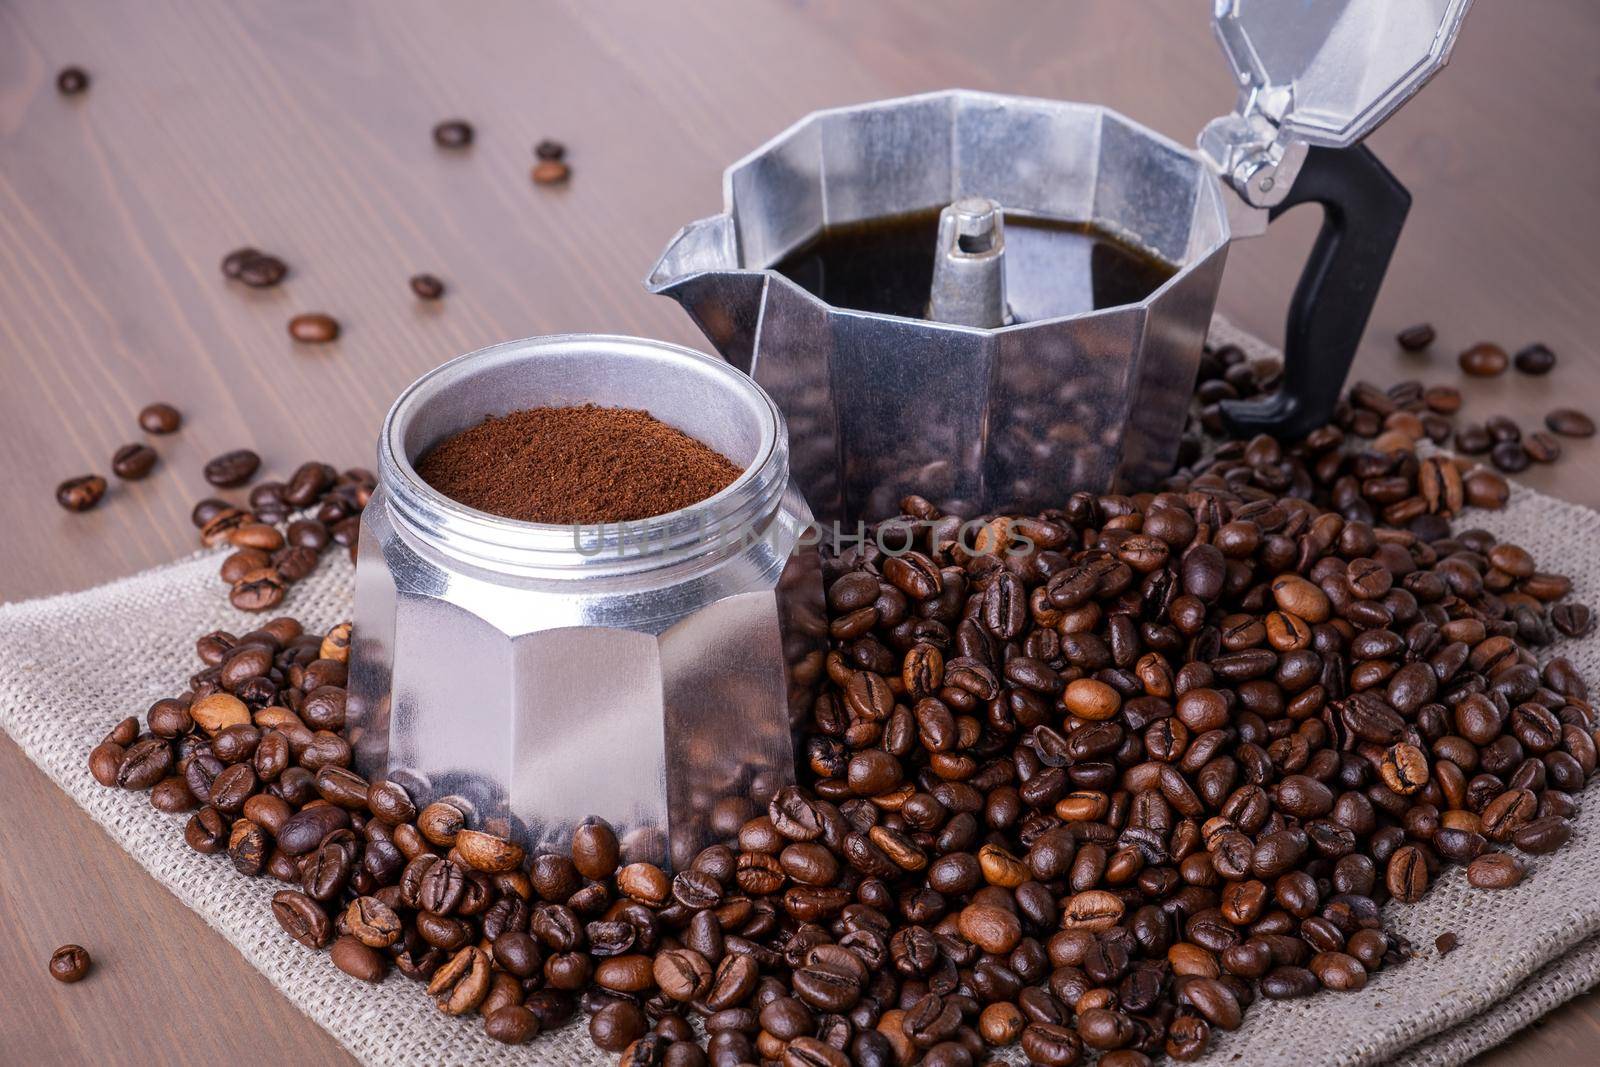 Close-up of disassembled geyser coffee maker on wooden surface. Coffee beans in pile, ground and brewed coffee. Coffee preparation. Selective focus.